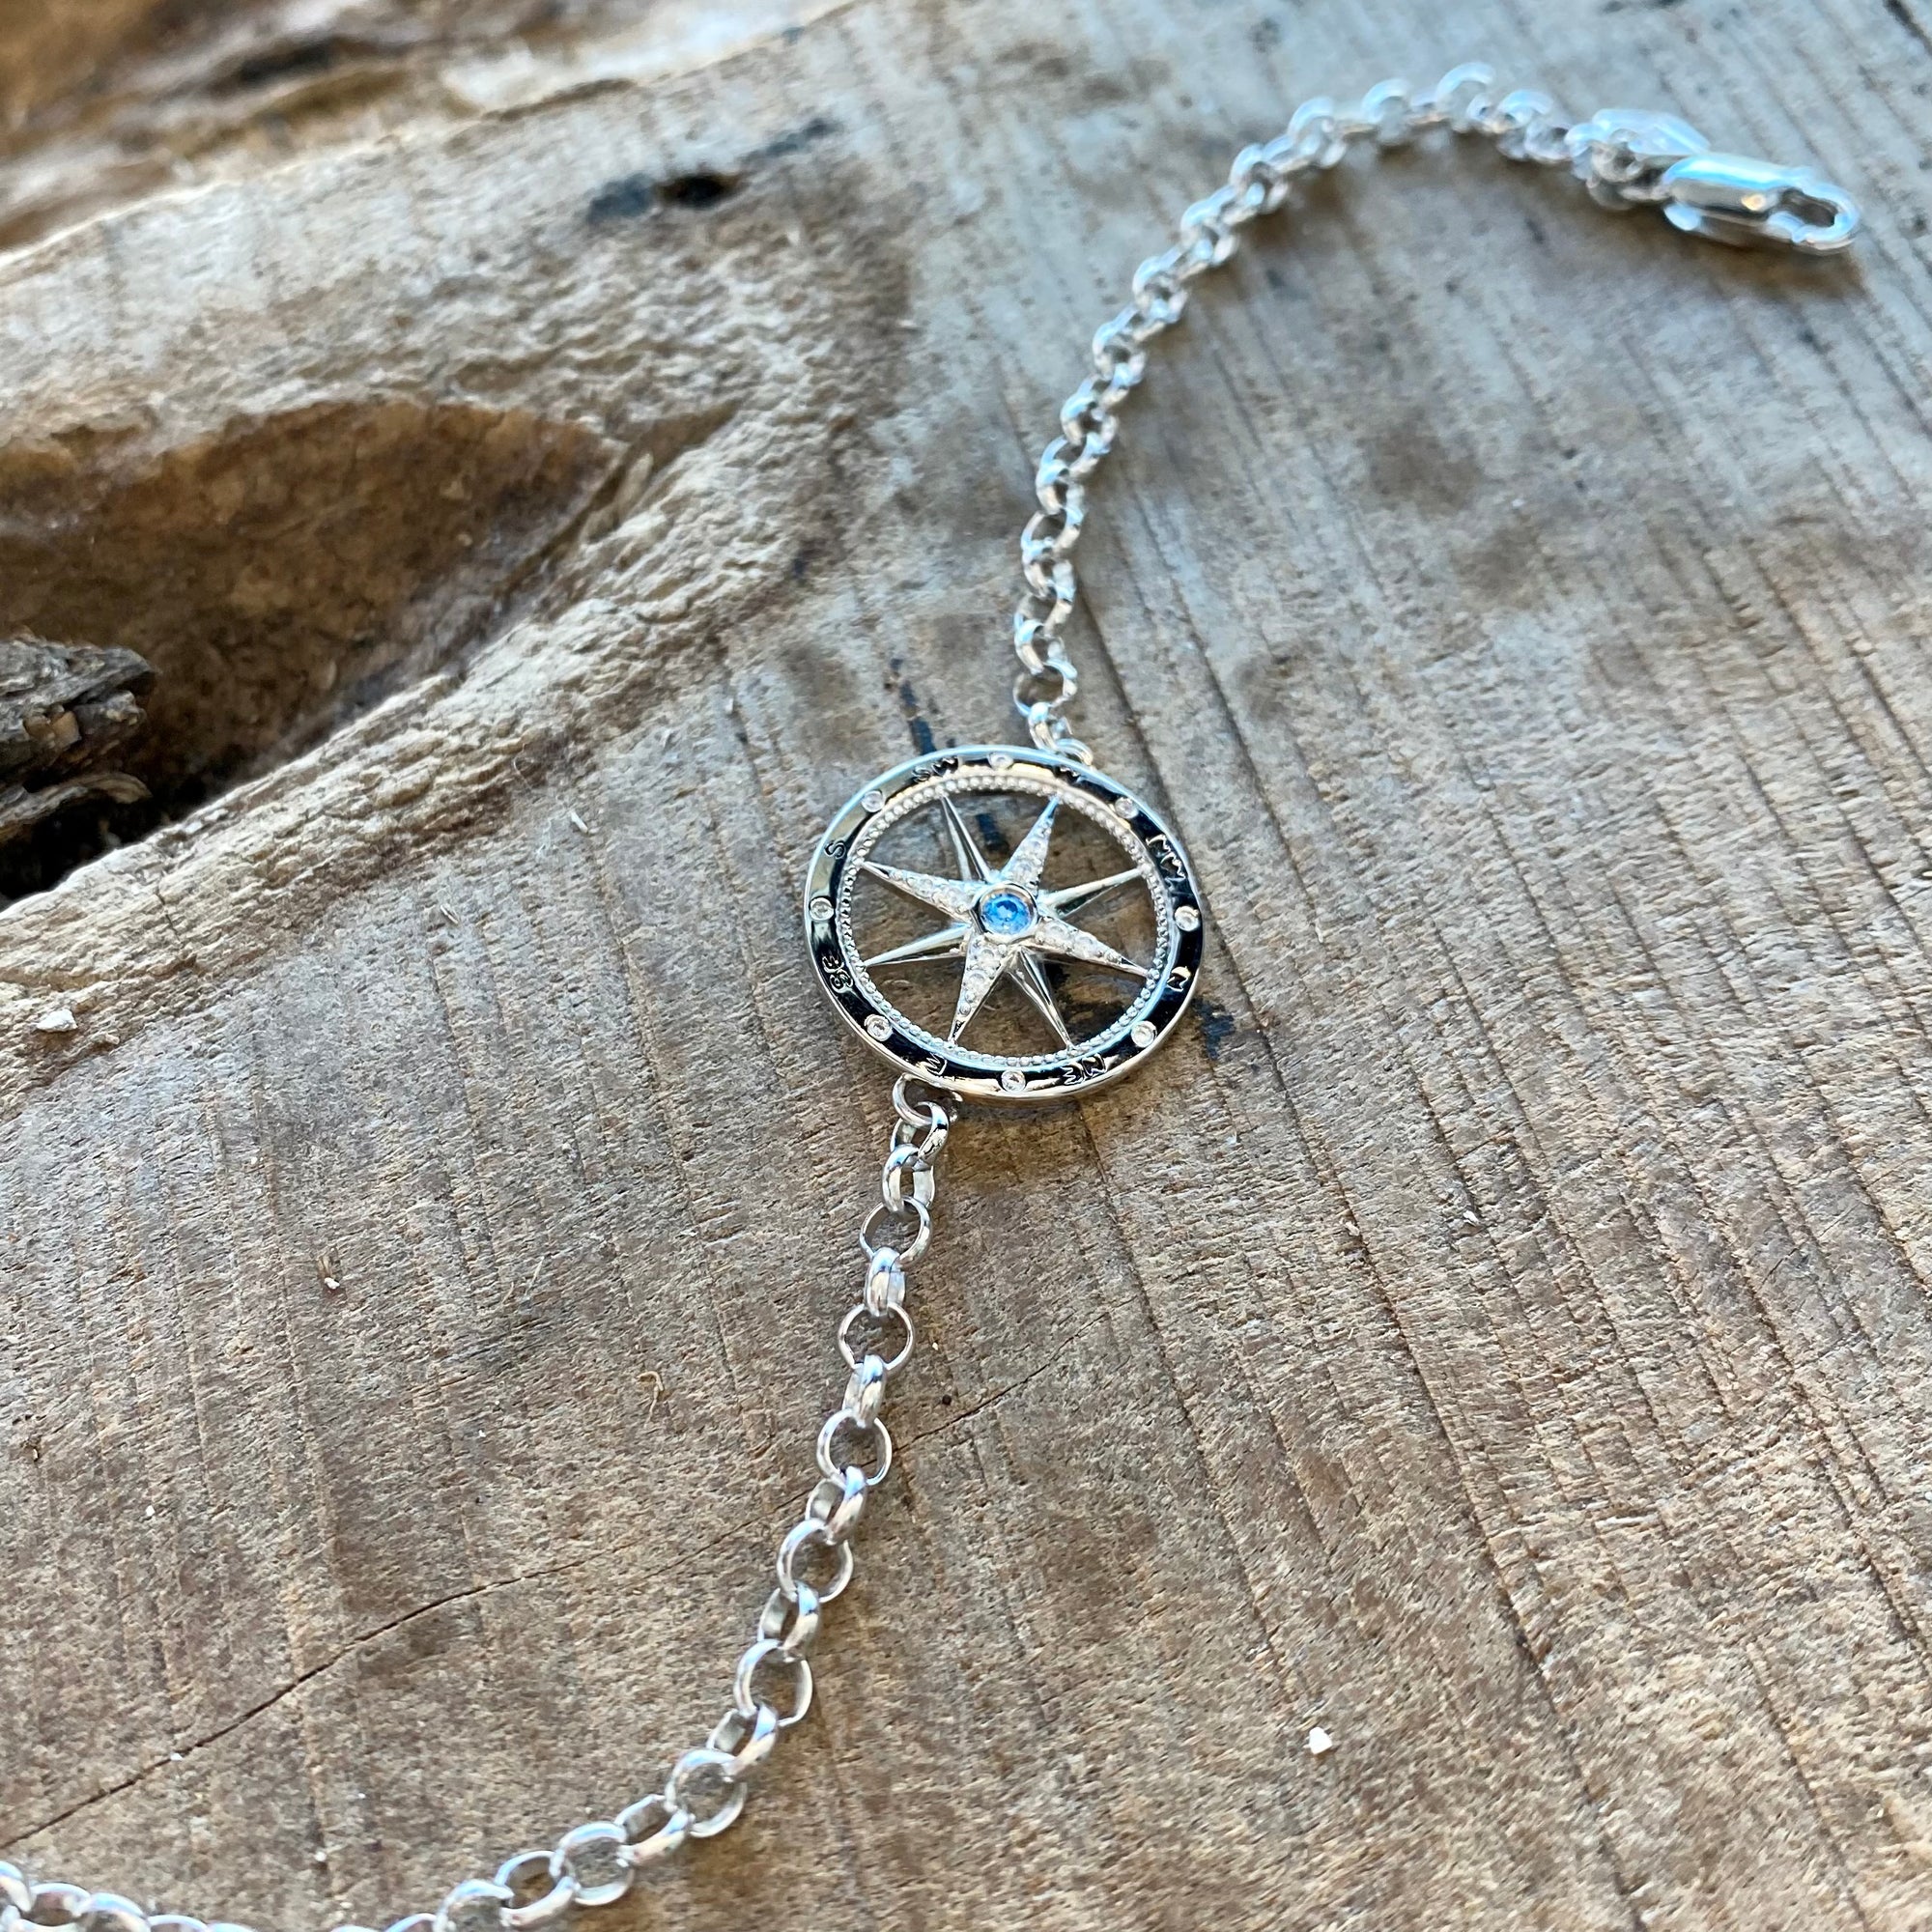 Compass Rose Bracelet -  Sterling Silver with Blue Zircon and White Crystals